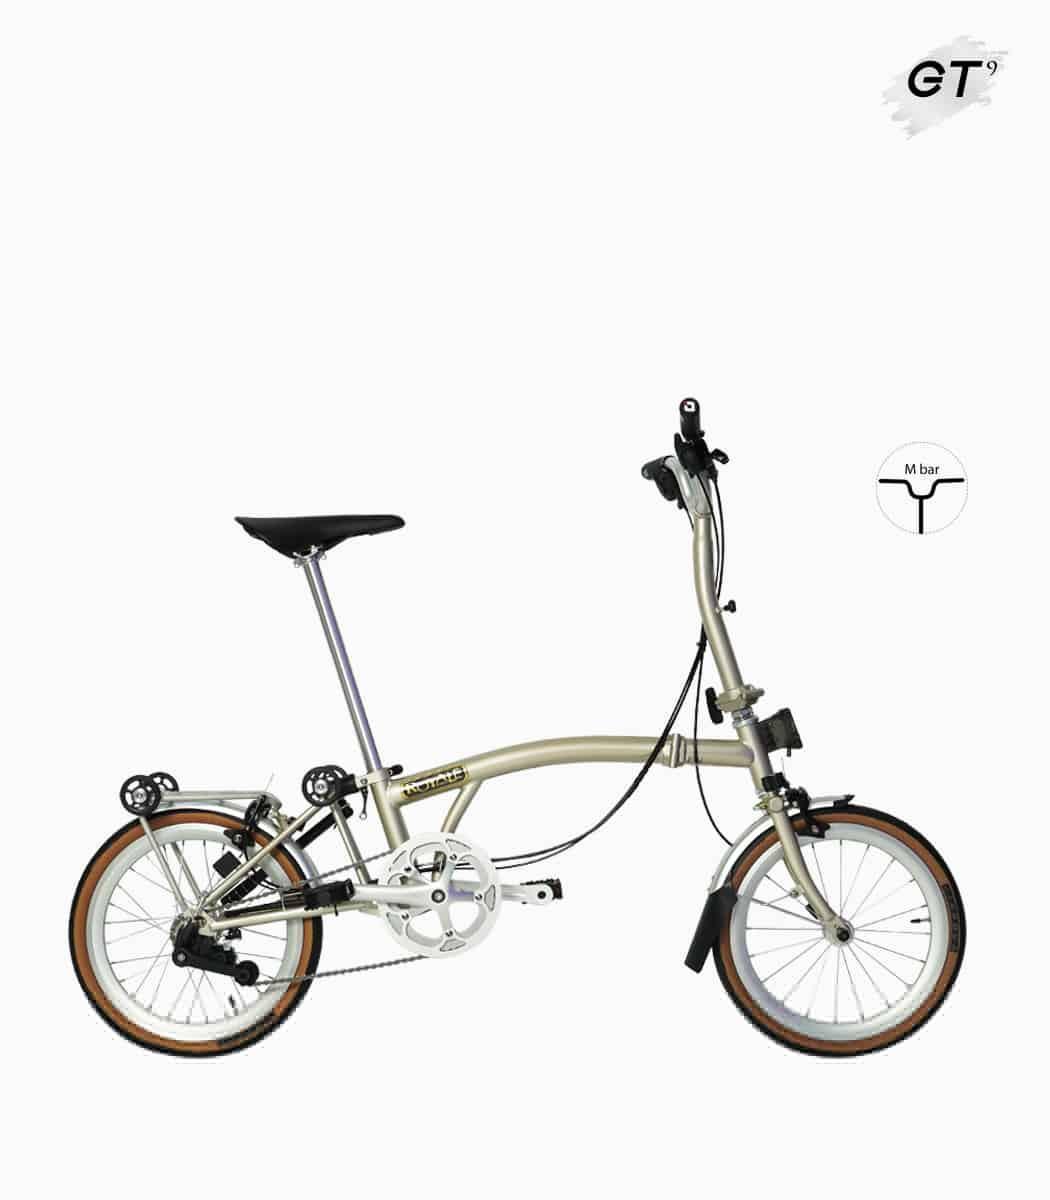 MOBOT ROYALE GT M9 (CHAMPAGNE GOLD) foldable bicycle silver edition right